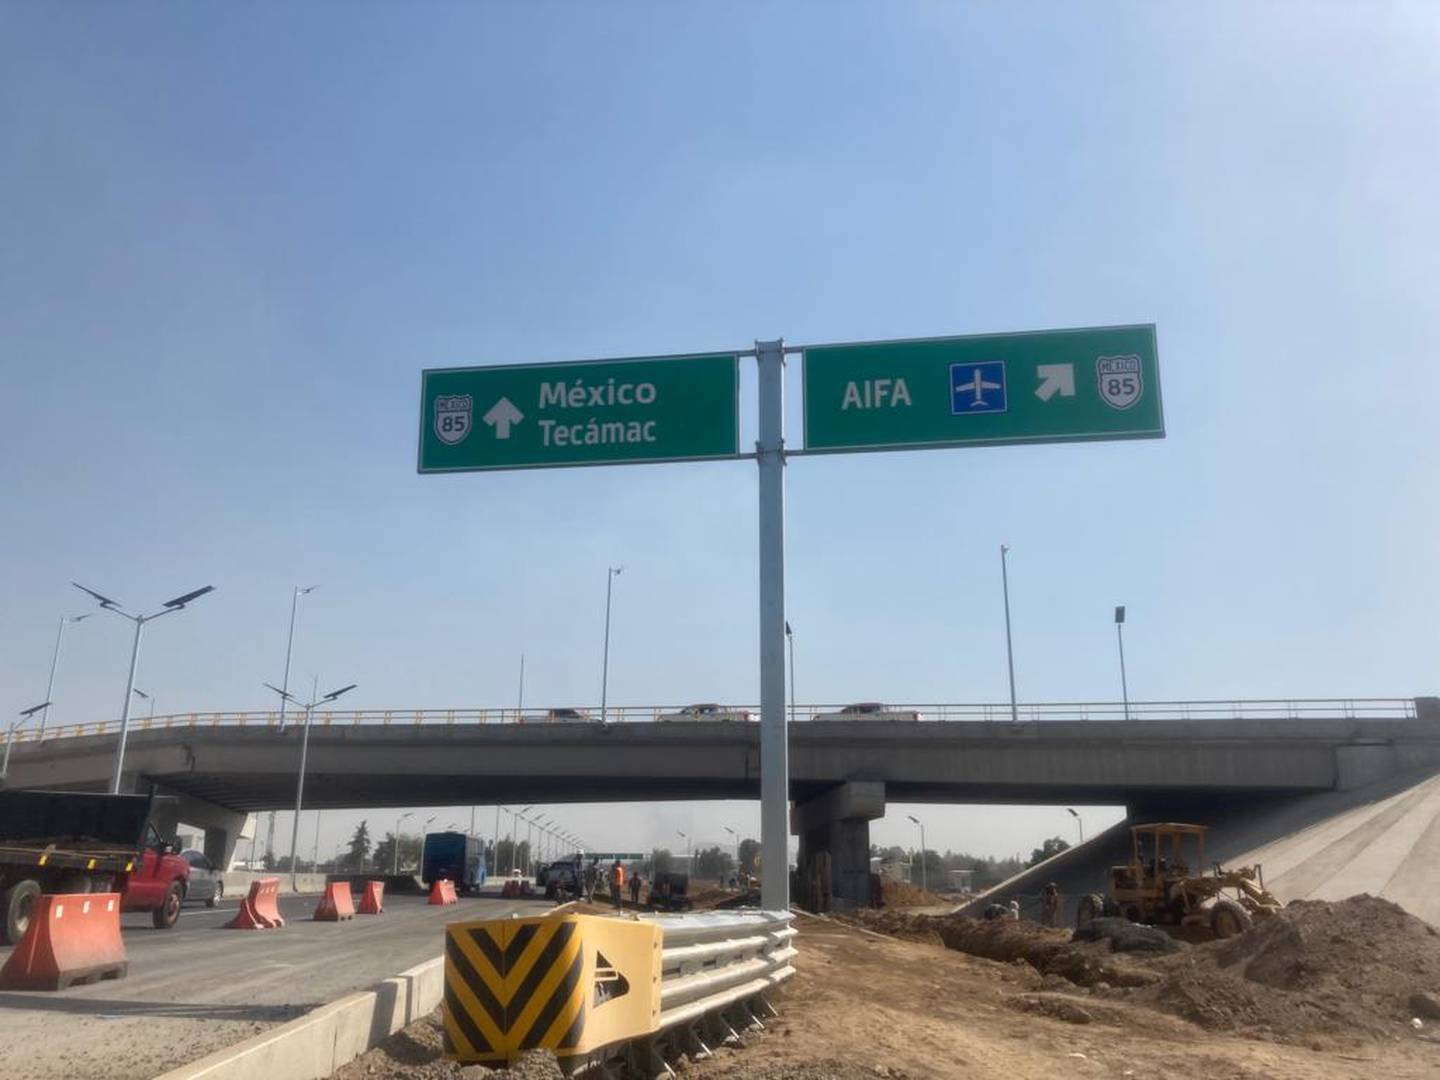 Roadworks are underway on the Mexico City-Pachuca highway to facilitate access to Mexico City's new international airport (AIFA). (Photo: Zenyazen Flores)